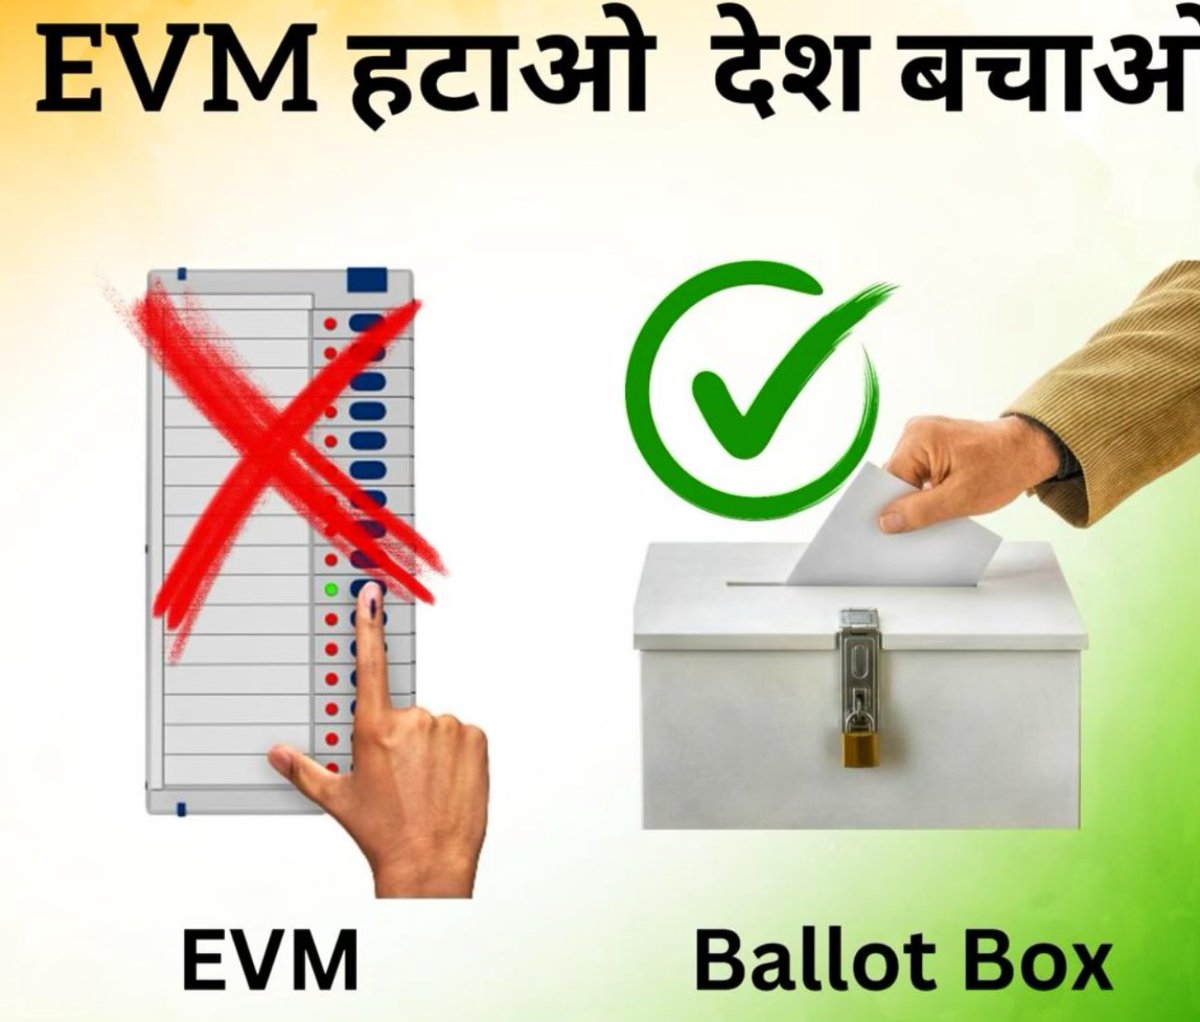 If you want to support the campaign 
BRING BACK BALLOT PAPER 
Please join the signature campaign by clicking on the link 
chng.it/fgNVvQNhvc

#BanEVM #banevm_save_democracy #BanEVM_Save_India #BanEVM_SaveDemocracy #ECI #ElectionCommissionOfIndia #EVM_हटाओ_लोकतंत्र_बचाओ